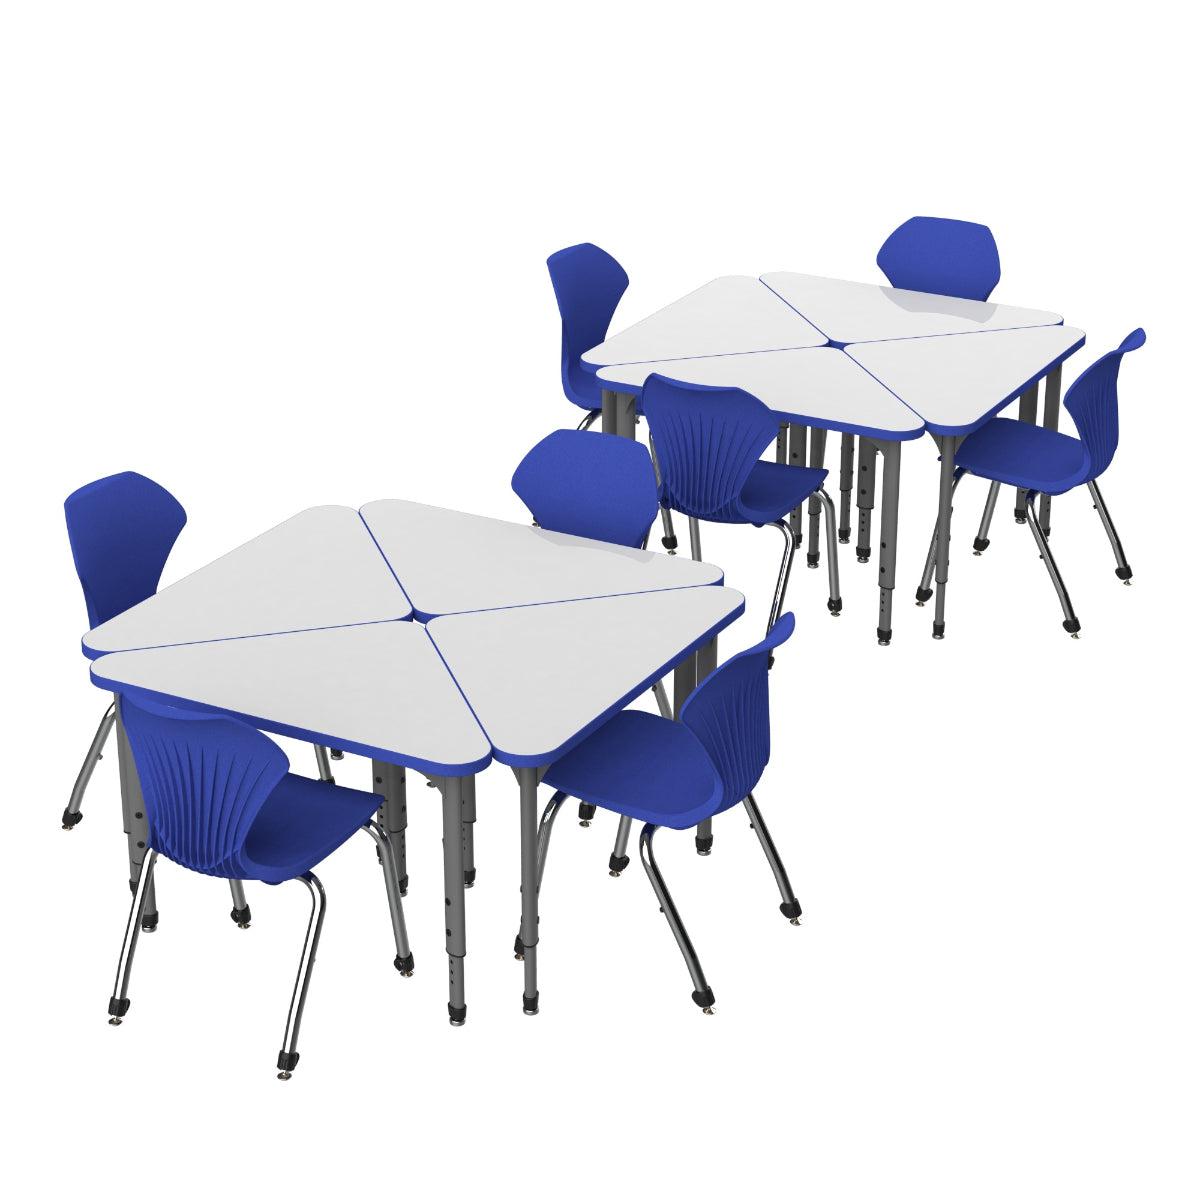 Apex White Dry Erase Classroom Desk and Chair Package, 8 Triangle Collaborative Student Desks with 8 Apex Stack Chairs